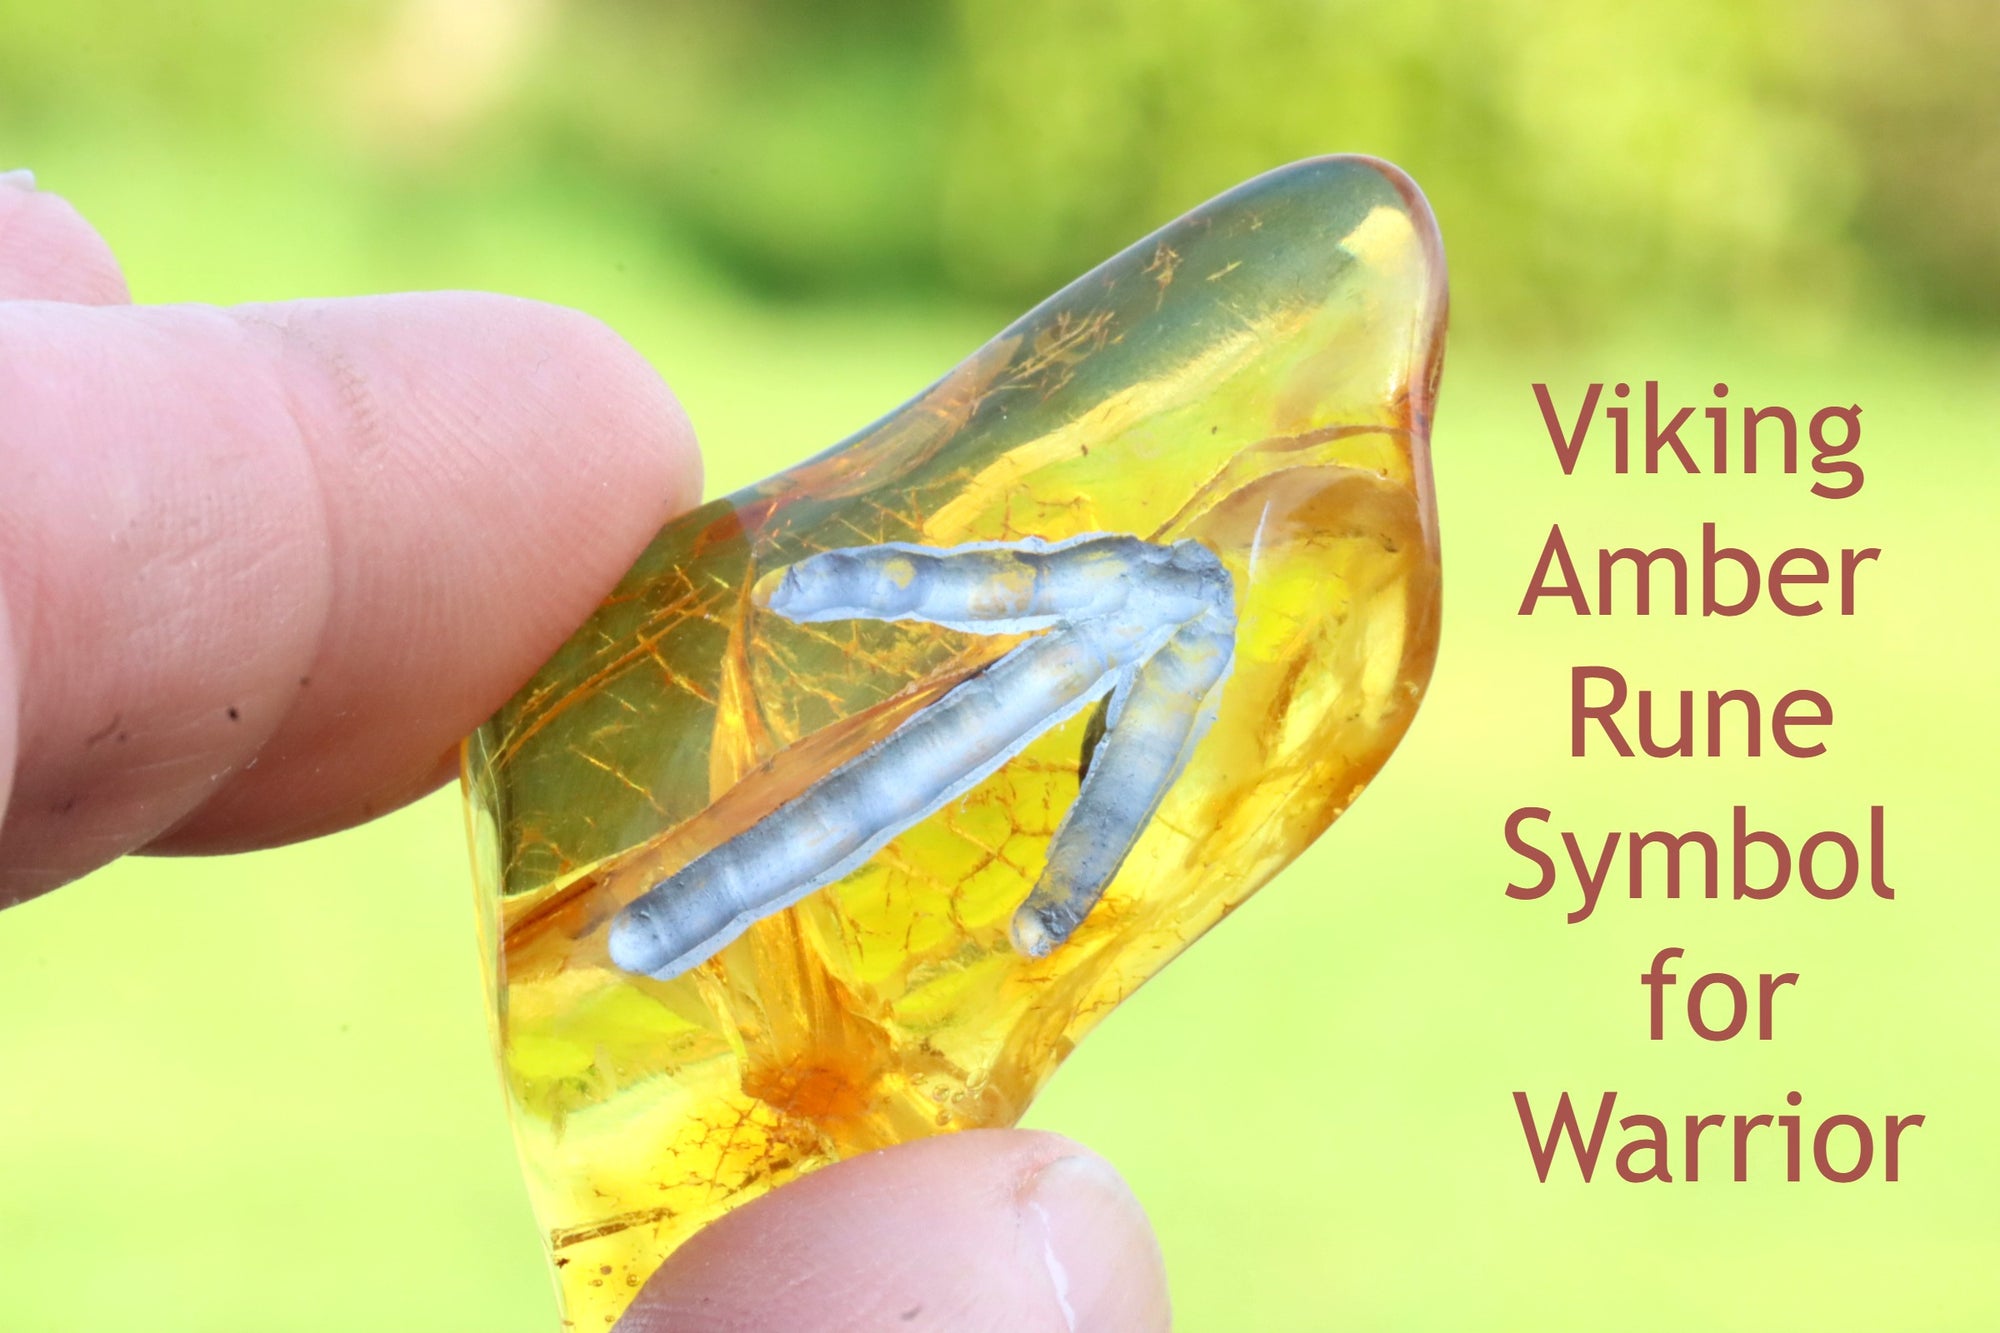 Viking Amber Rune Symbol for Warrior and Victory